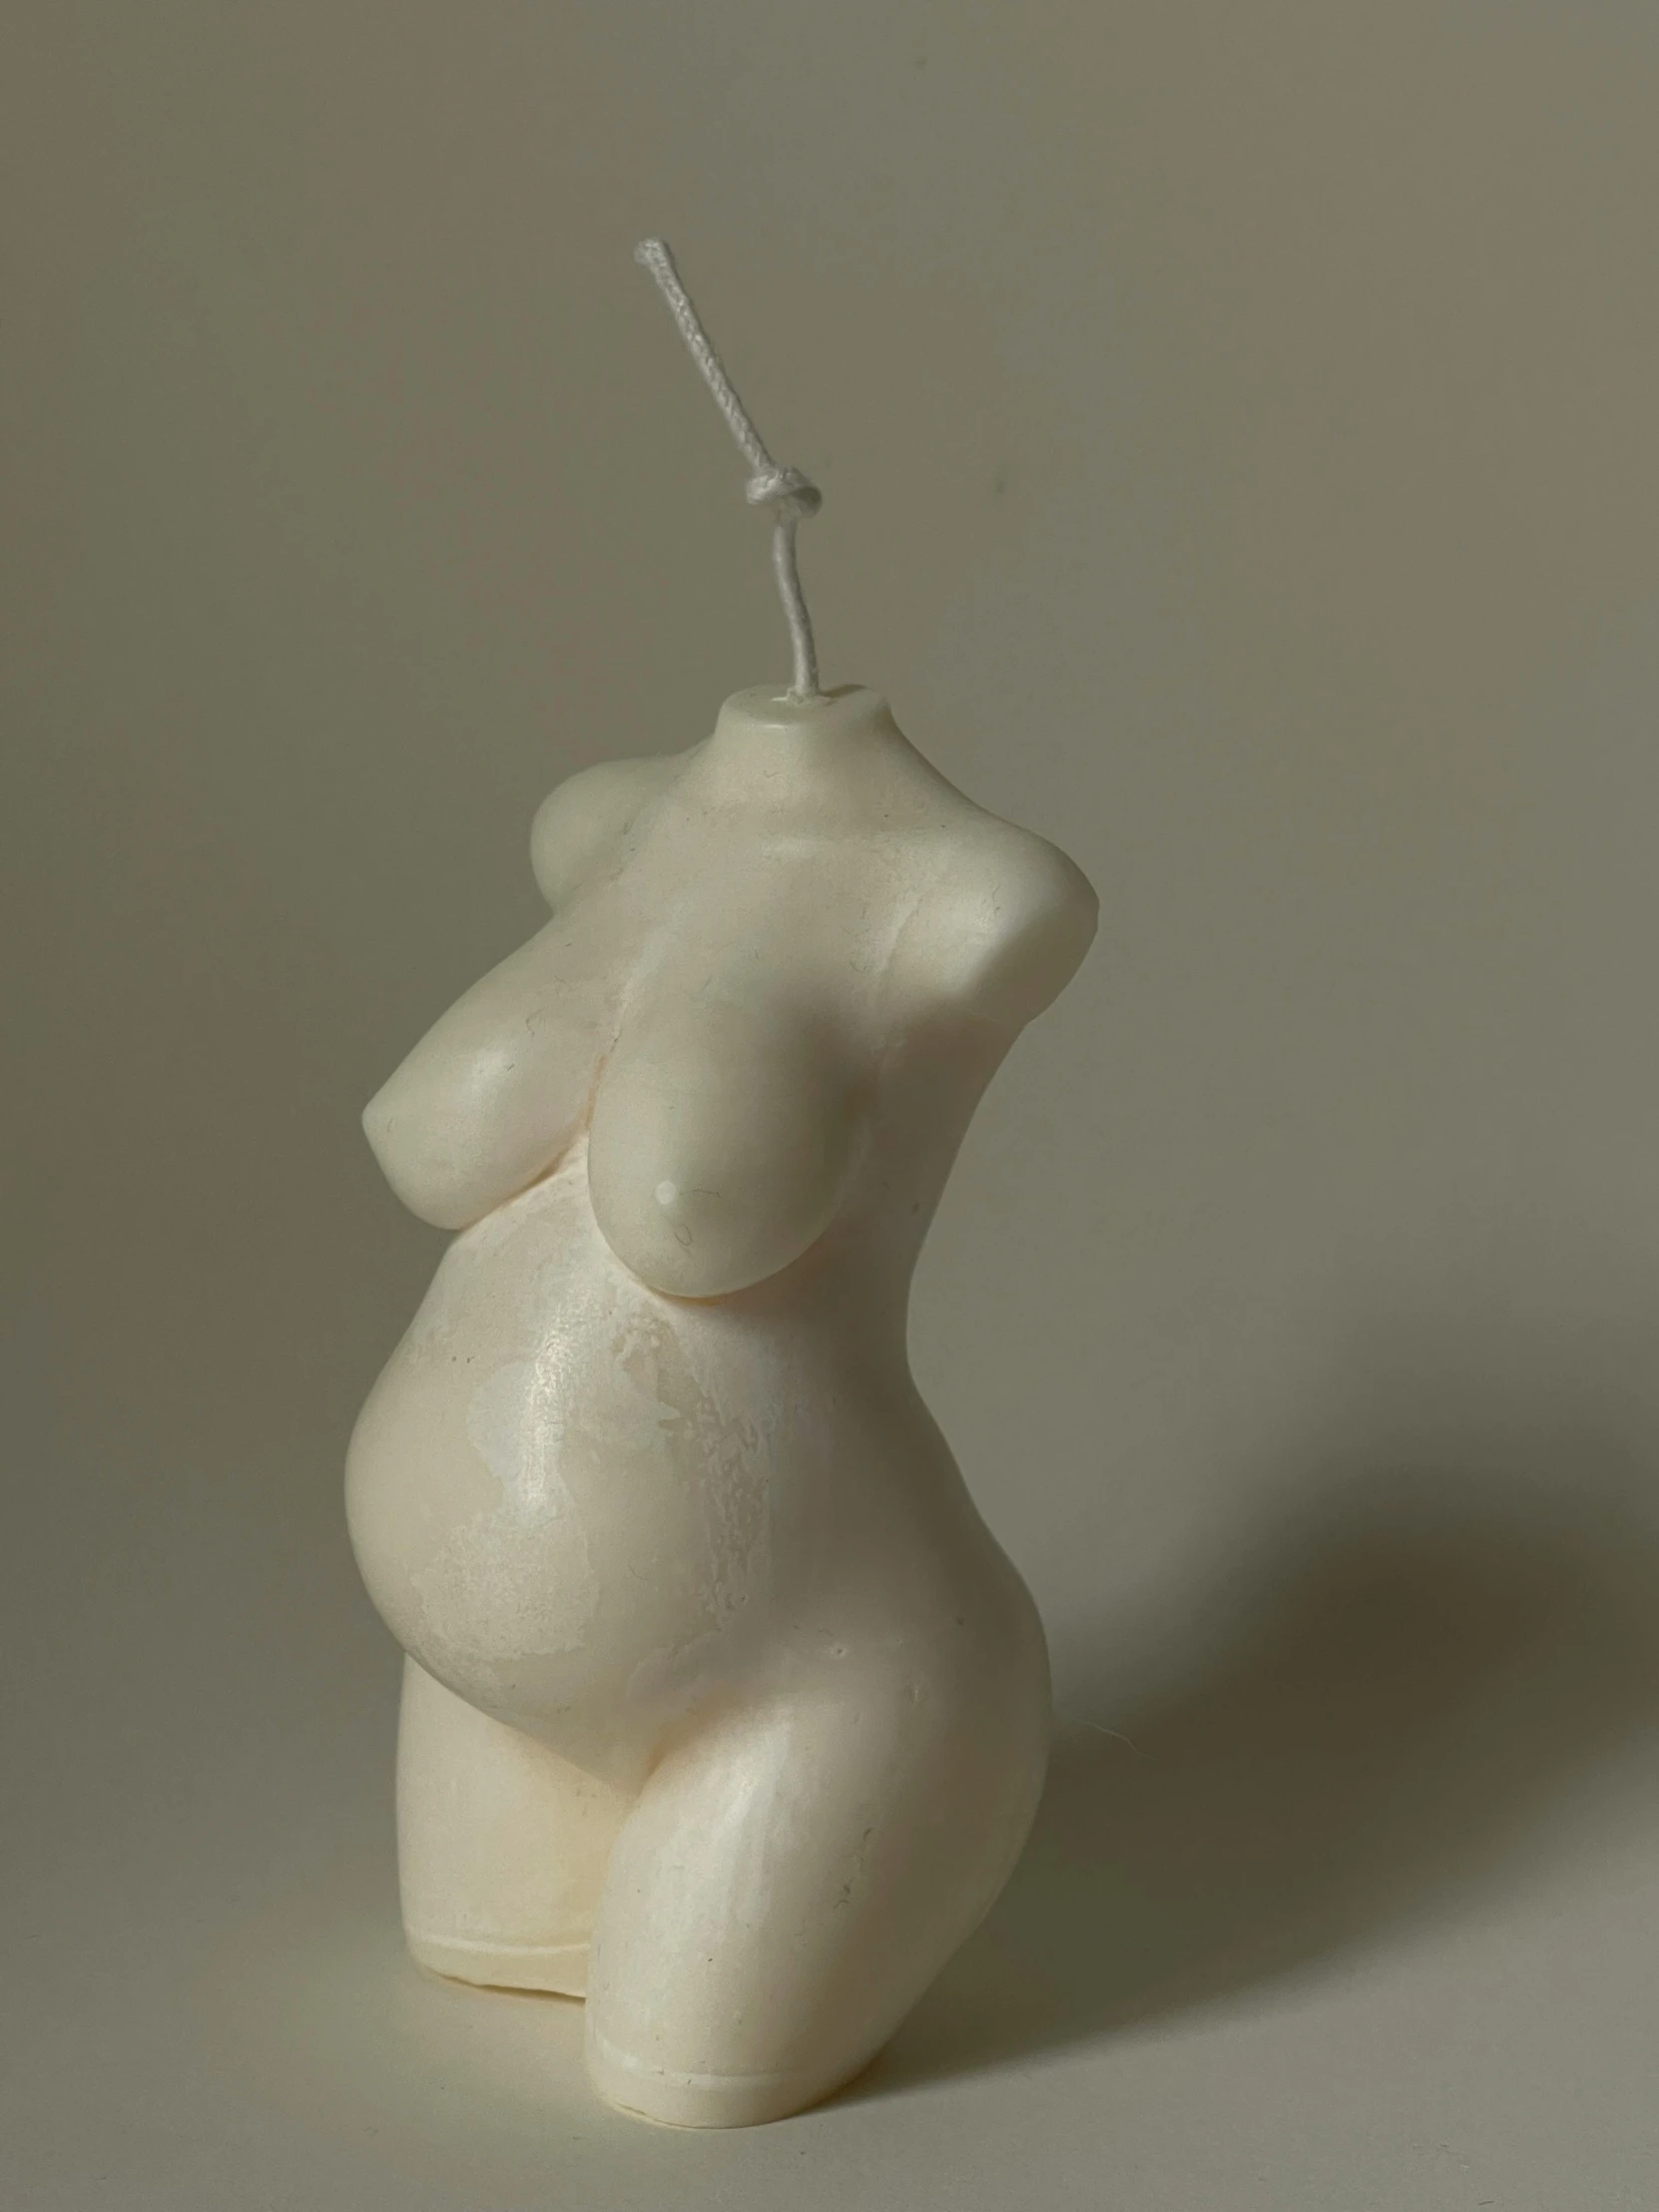 a white plastic figure is hanging from a stick